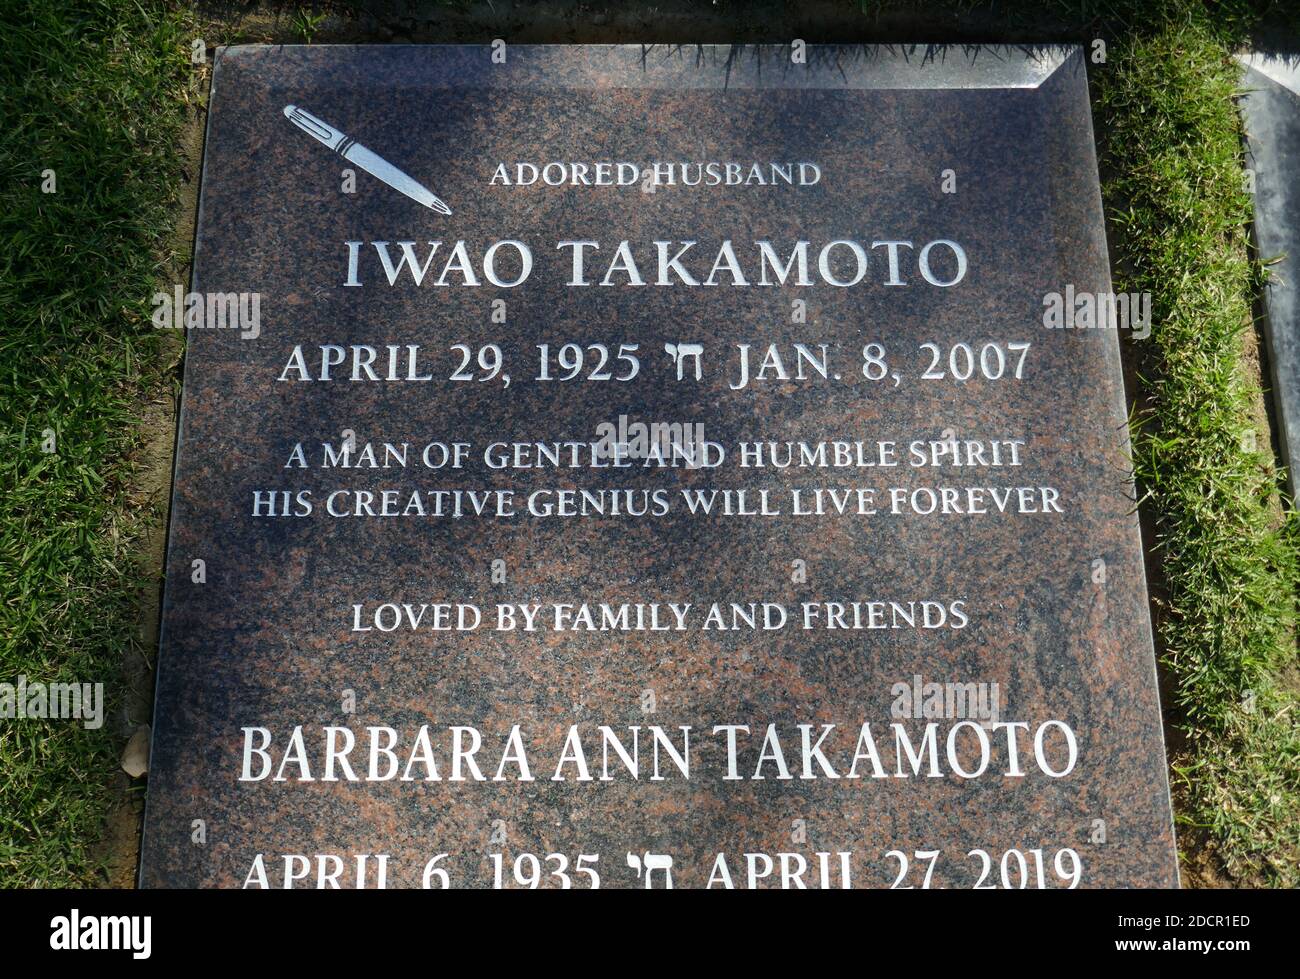 Los Angeles, California, USA 17th November 2020 A general view of atmosphere of animator Iwao Takamoto's Grave at Mount Sinai Cemetery Hollywood Hills on November 17, 2020 in Los Angeles, California, USA. Photo by Barry King/Alamy Stock Photo Stock Photo